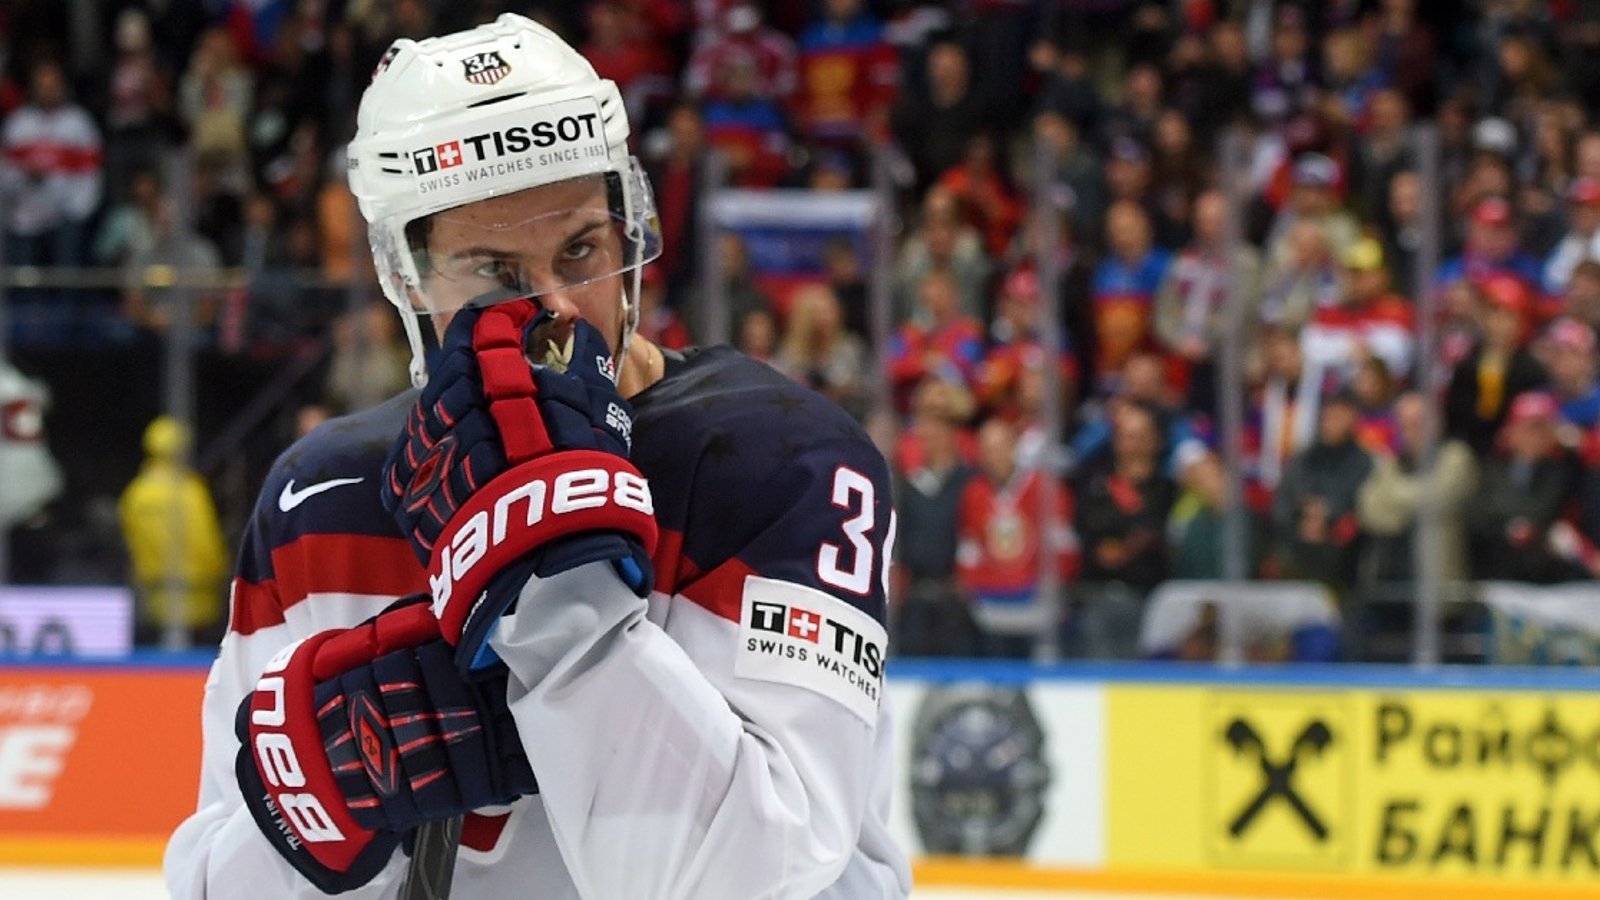 Auston Matthews has climbed his way all the way up Team North America's roster.